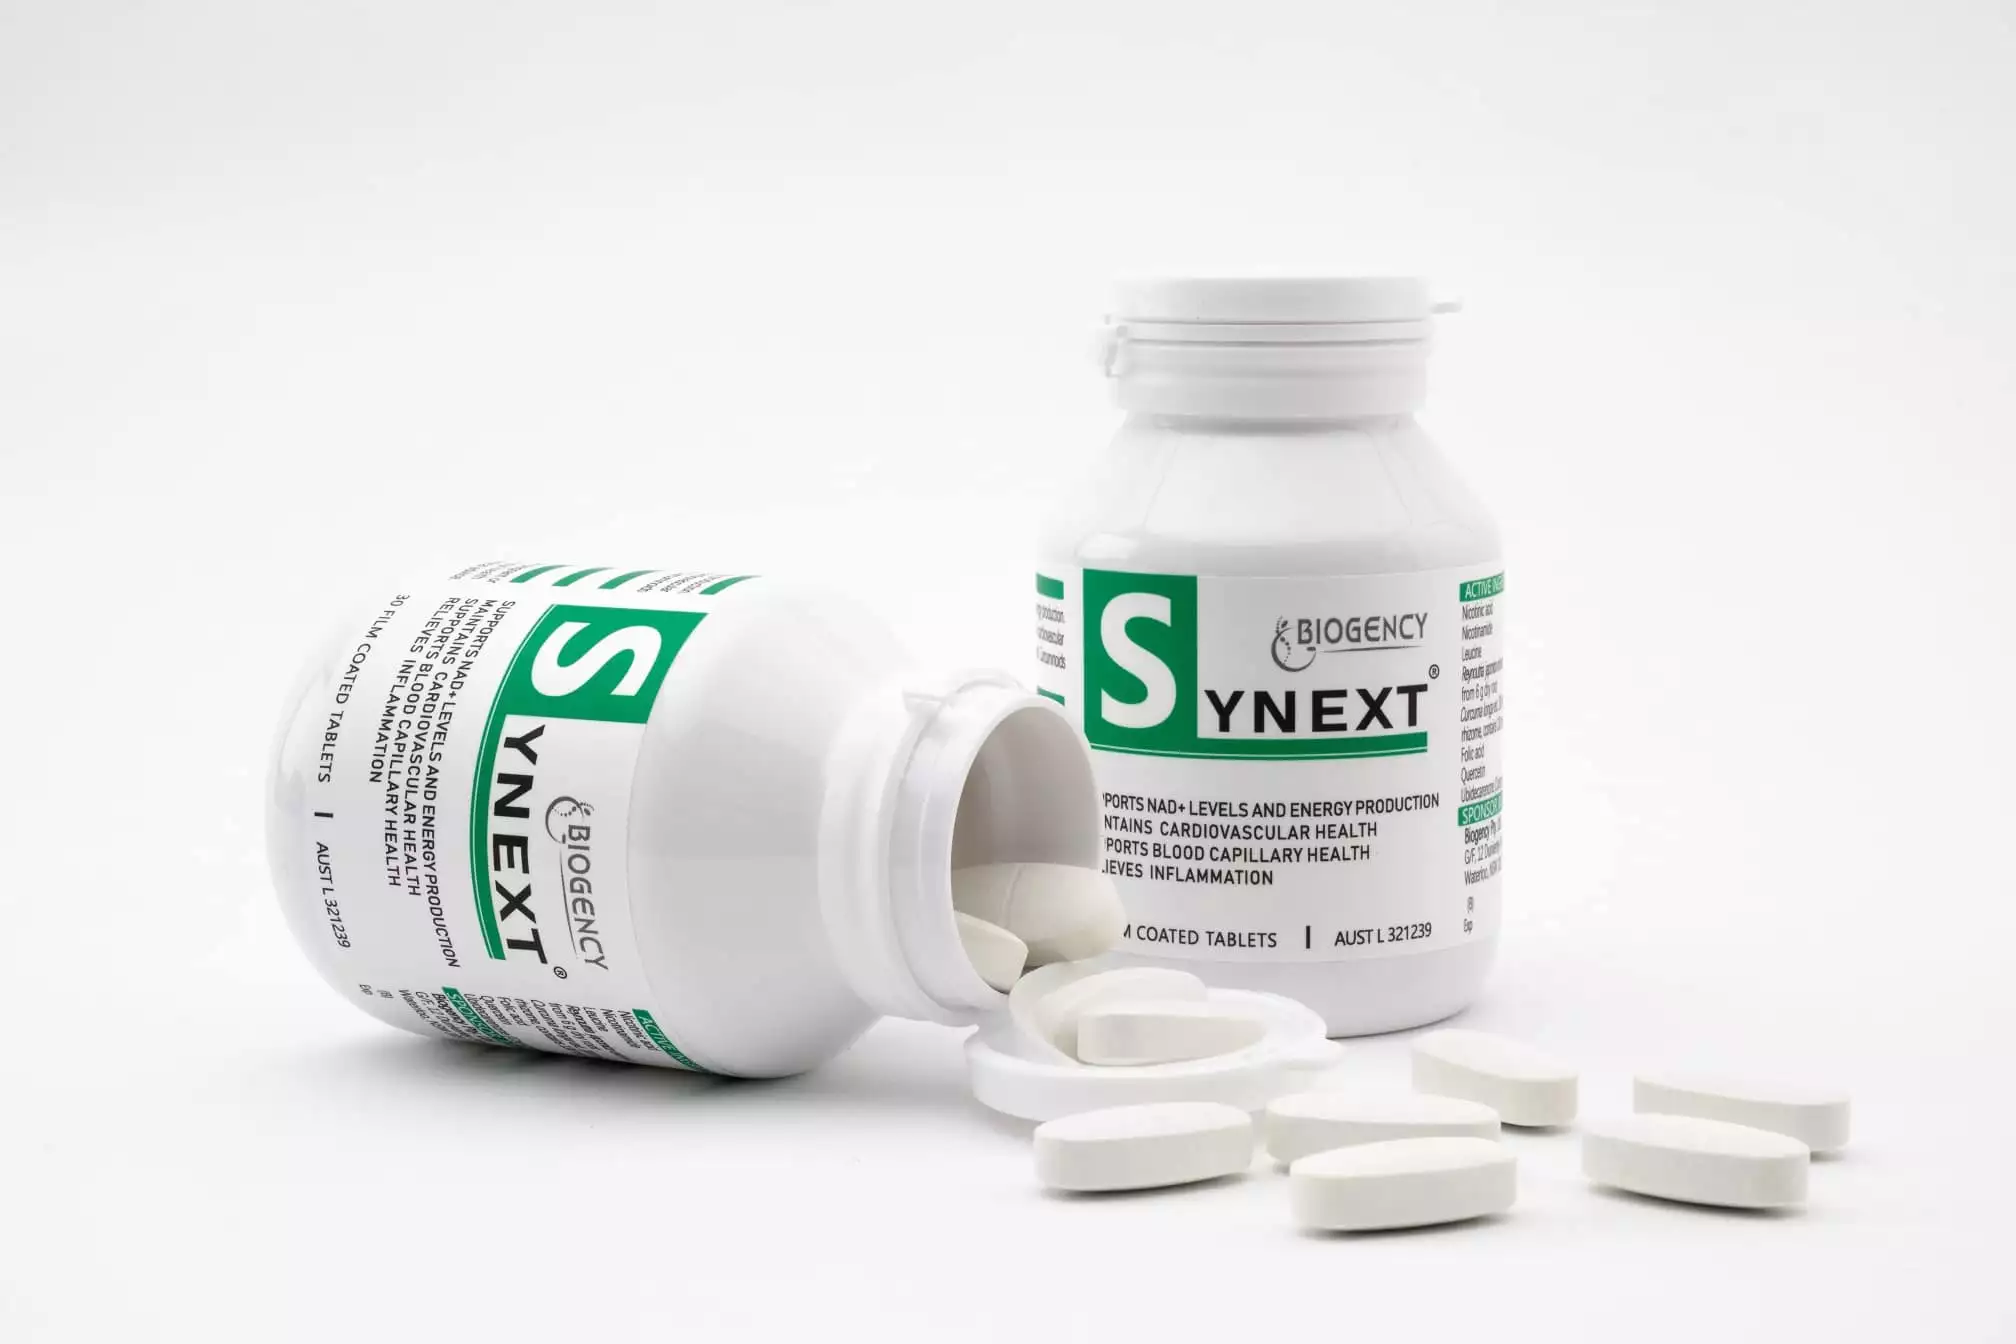 Synext: The Newest Anti-Ageing Supplement on the Market